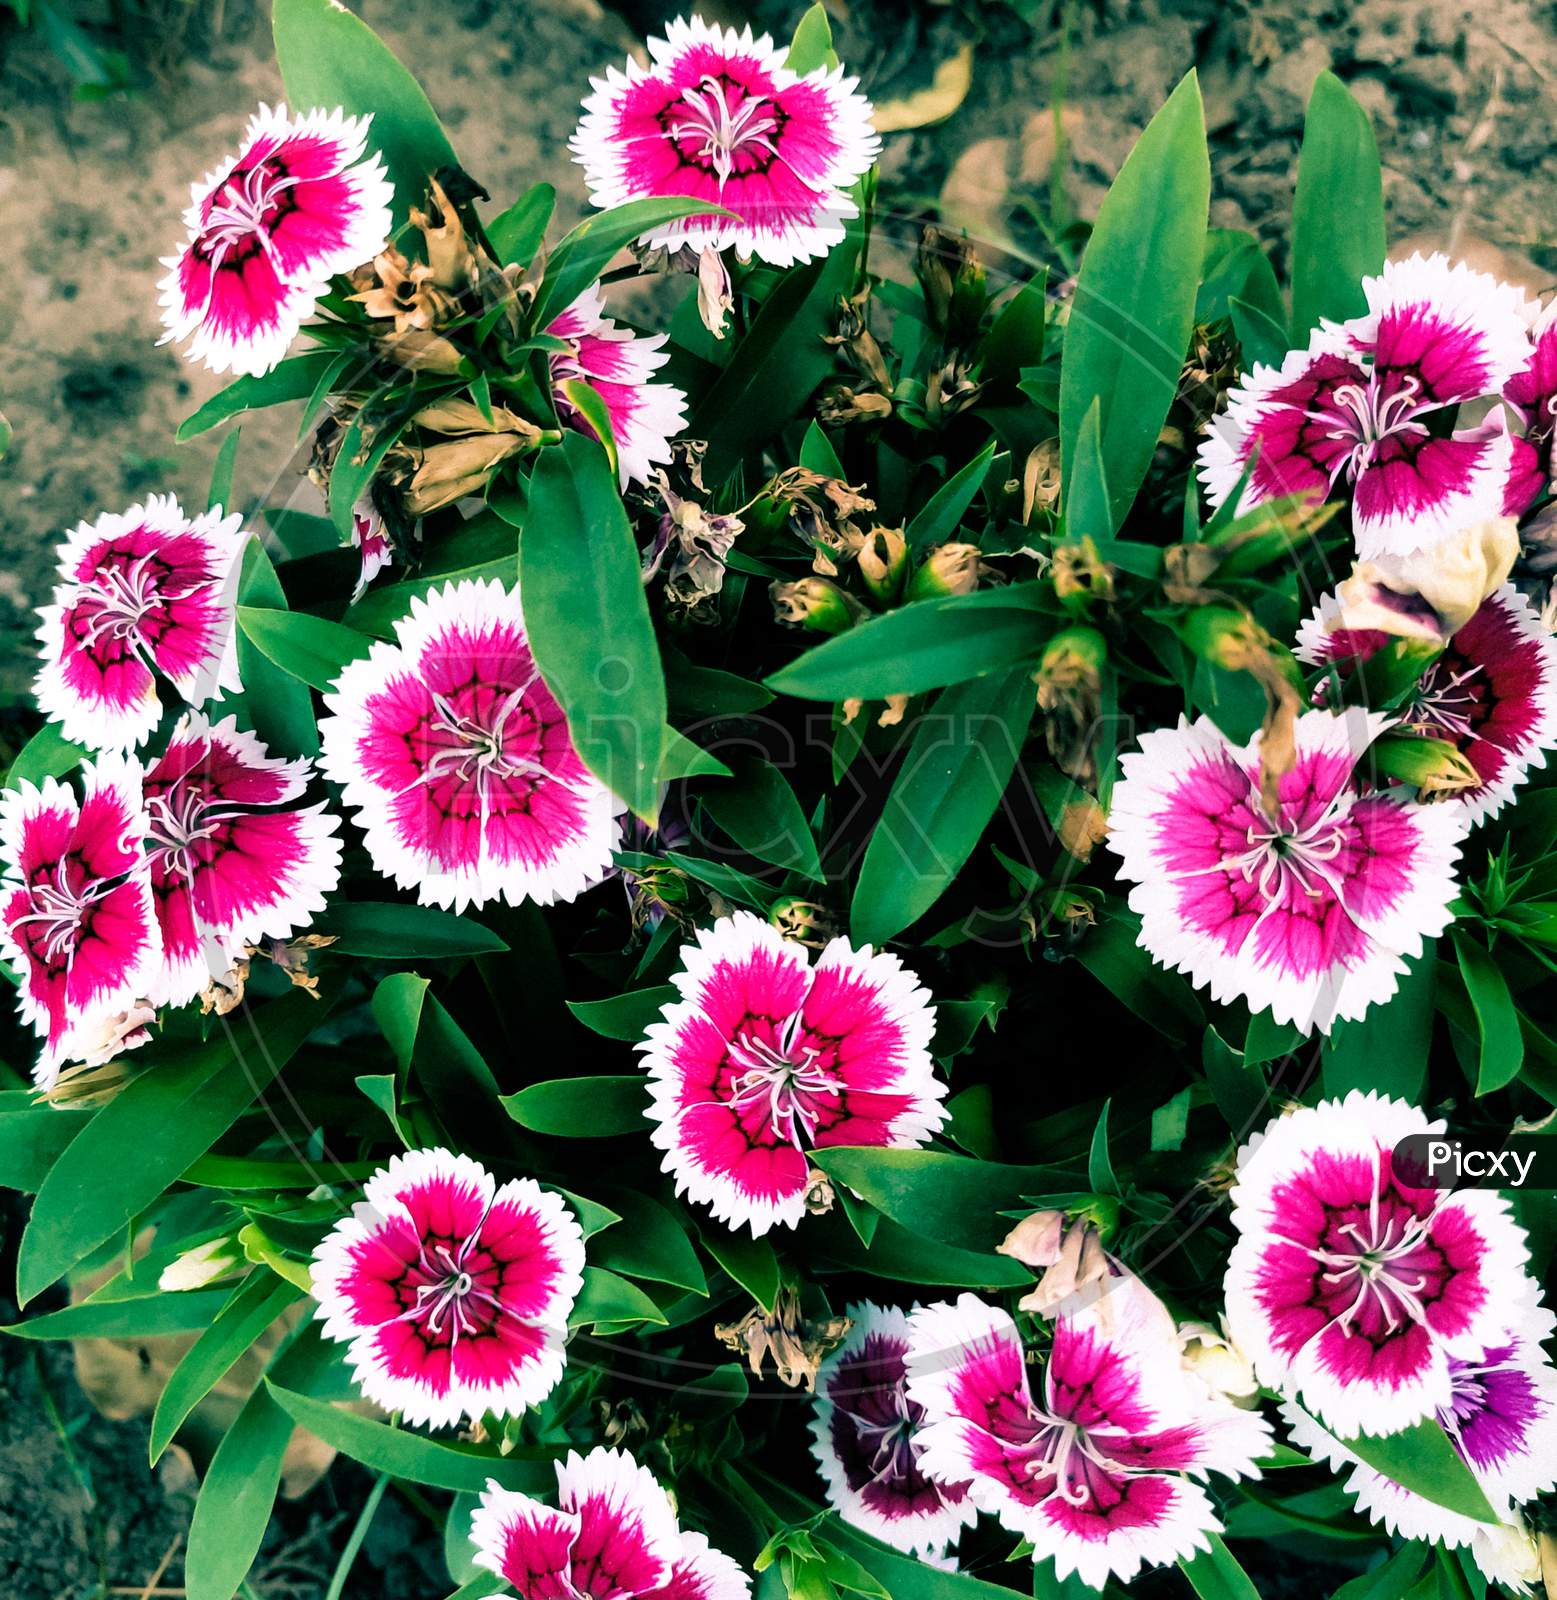 Dianthus chinensis, commonly known as rainbow pink or China pink  is a species of Dianthus